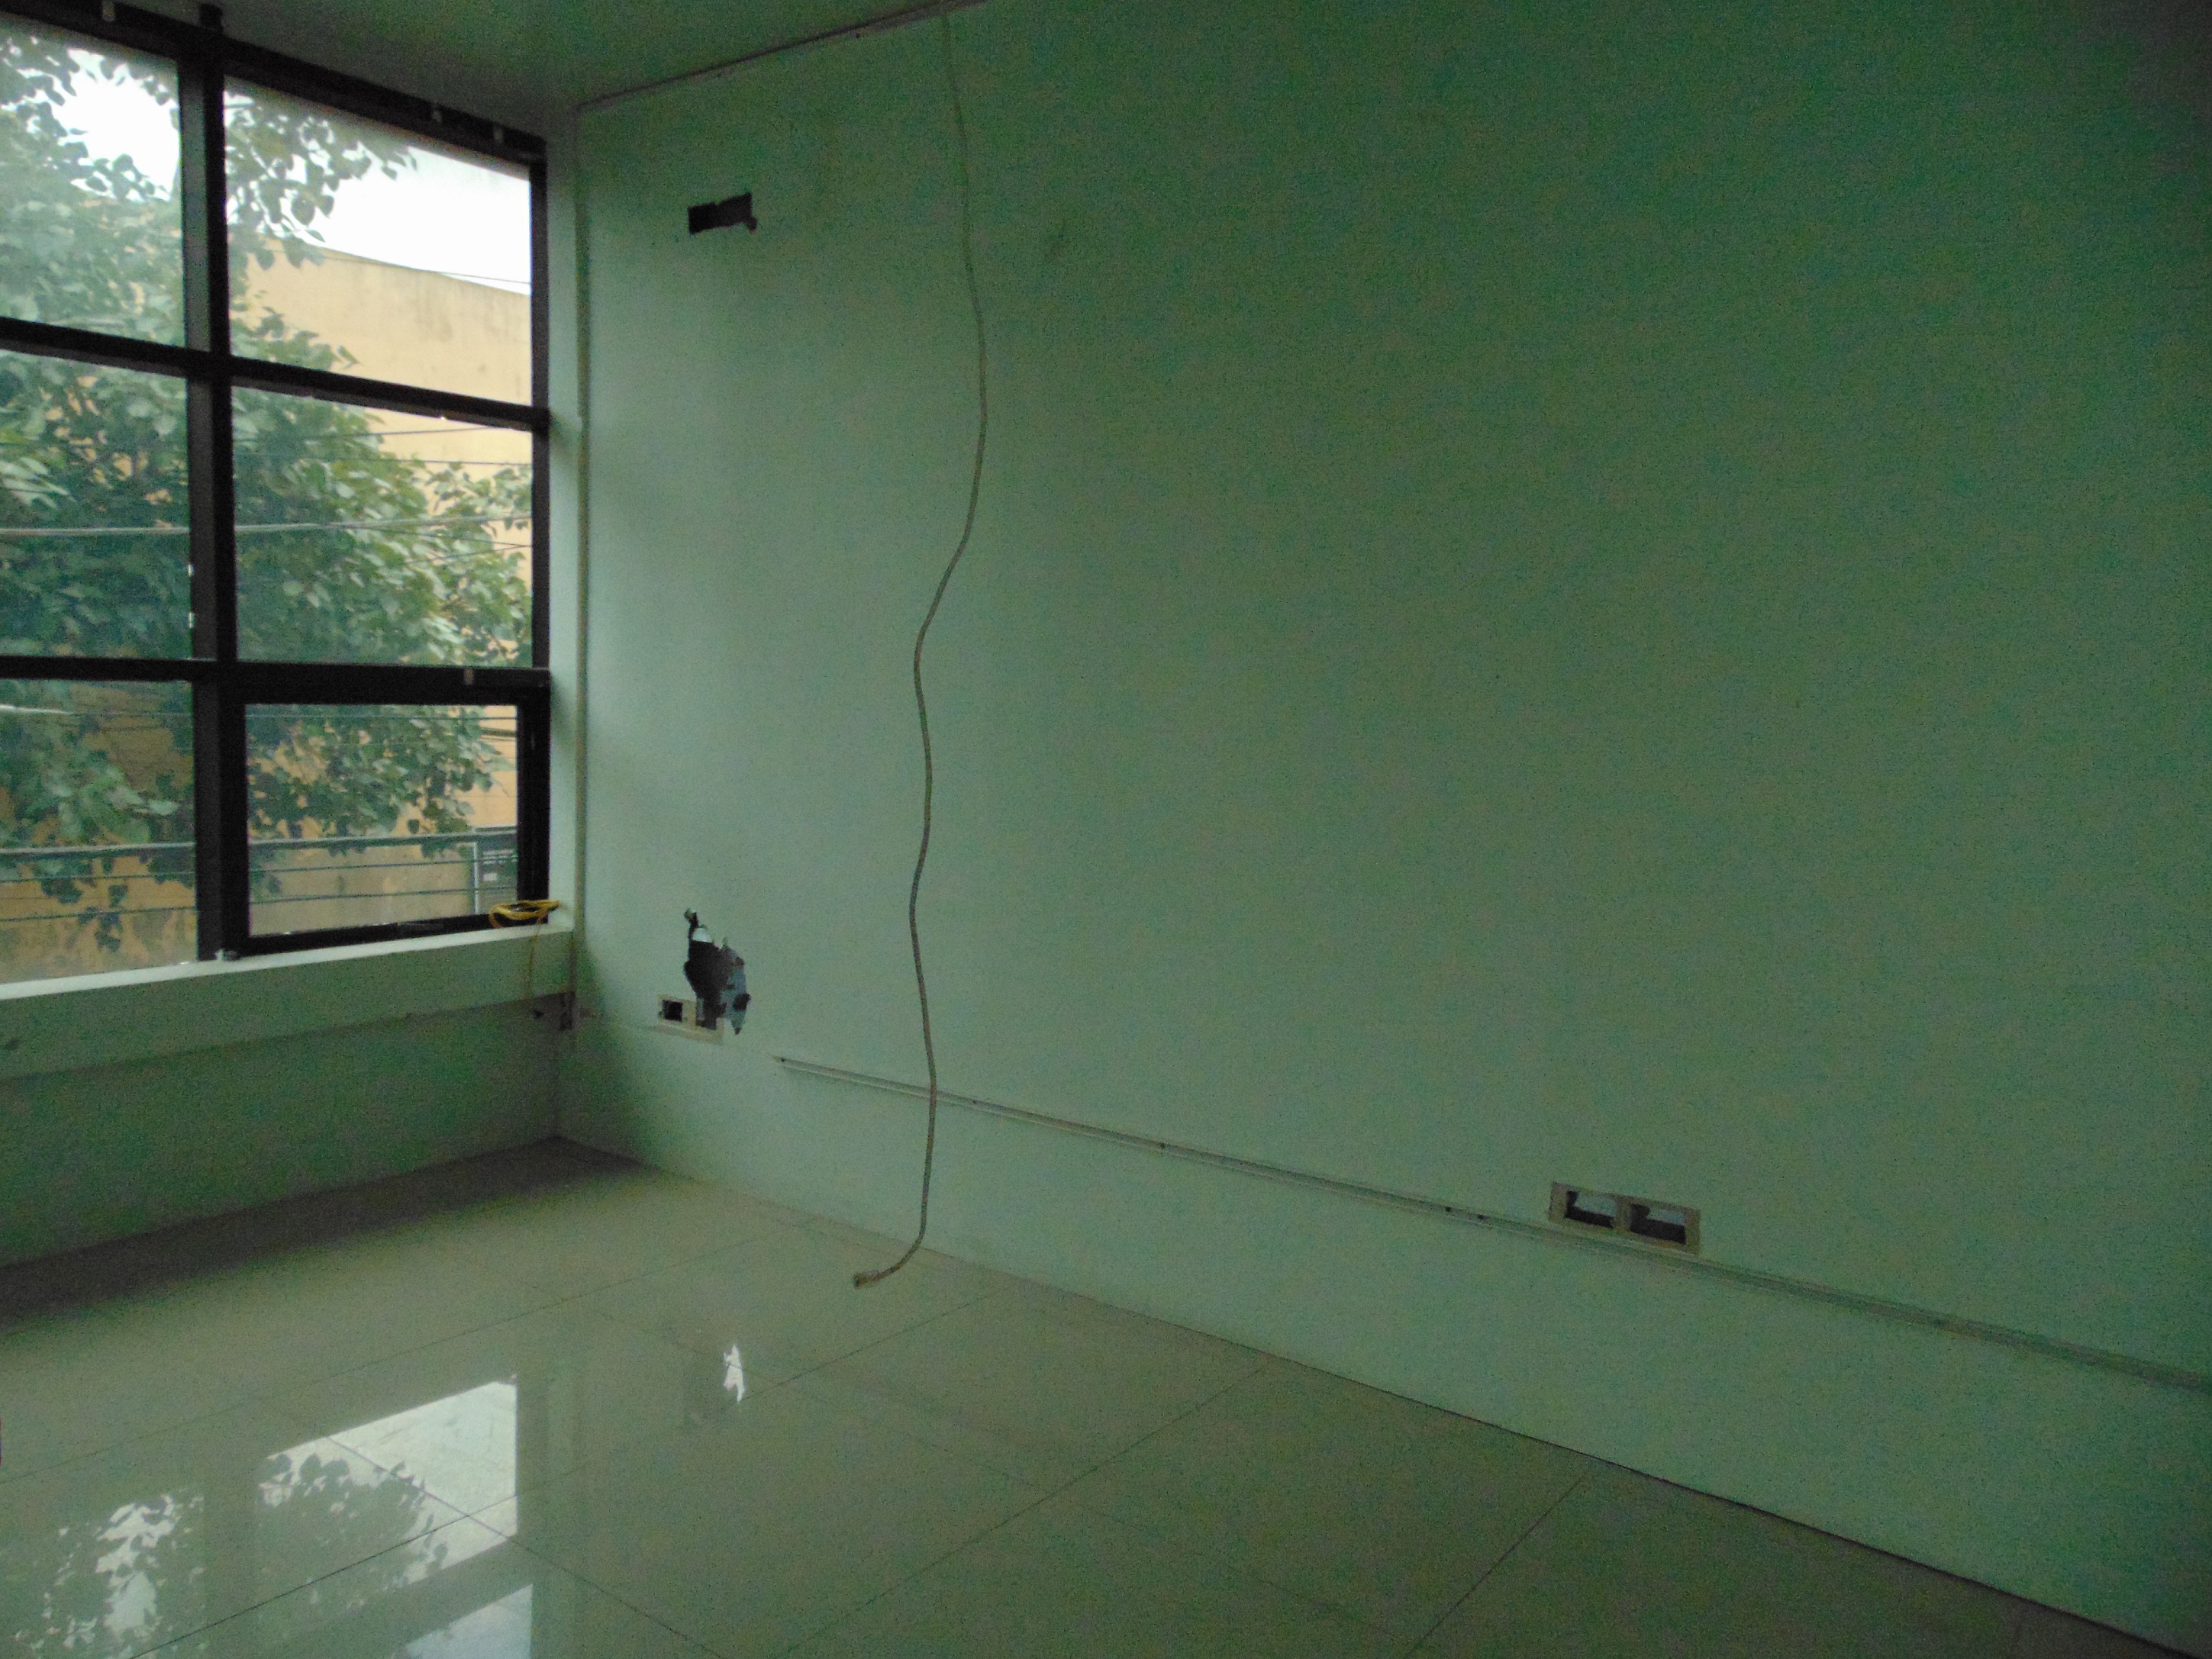 290-sqm-office-with-partitions-in-mandaue-city-ideal-for-bpos